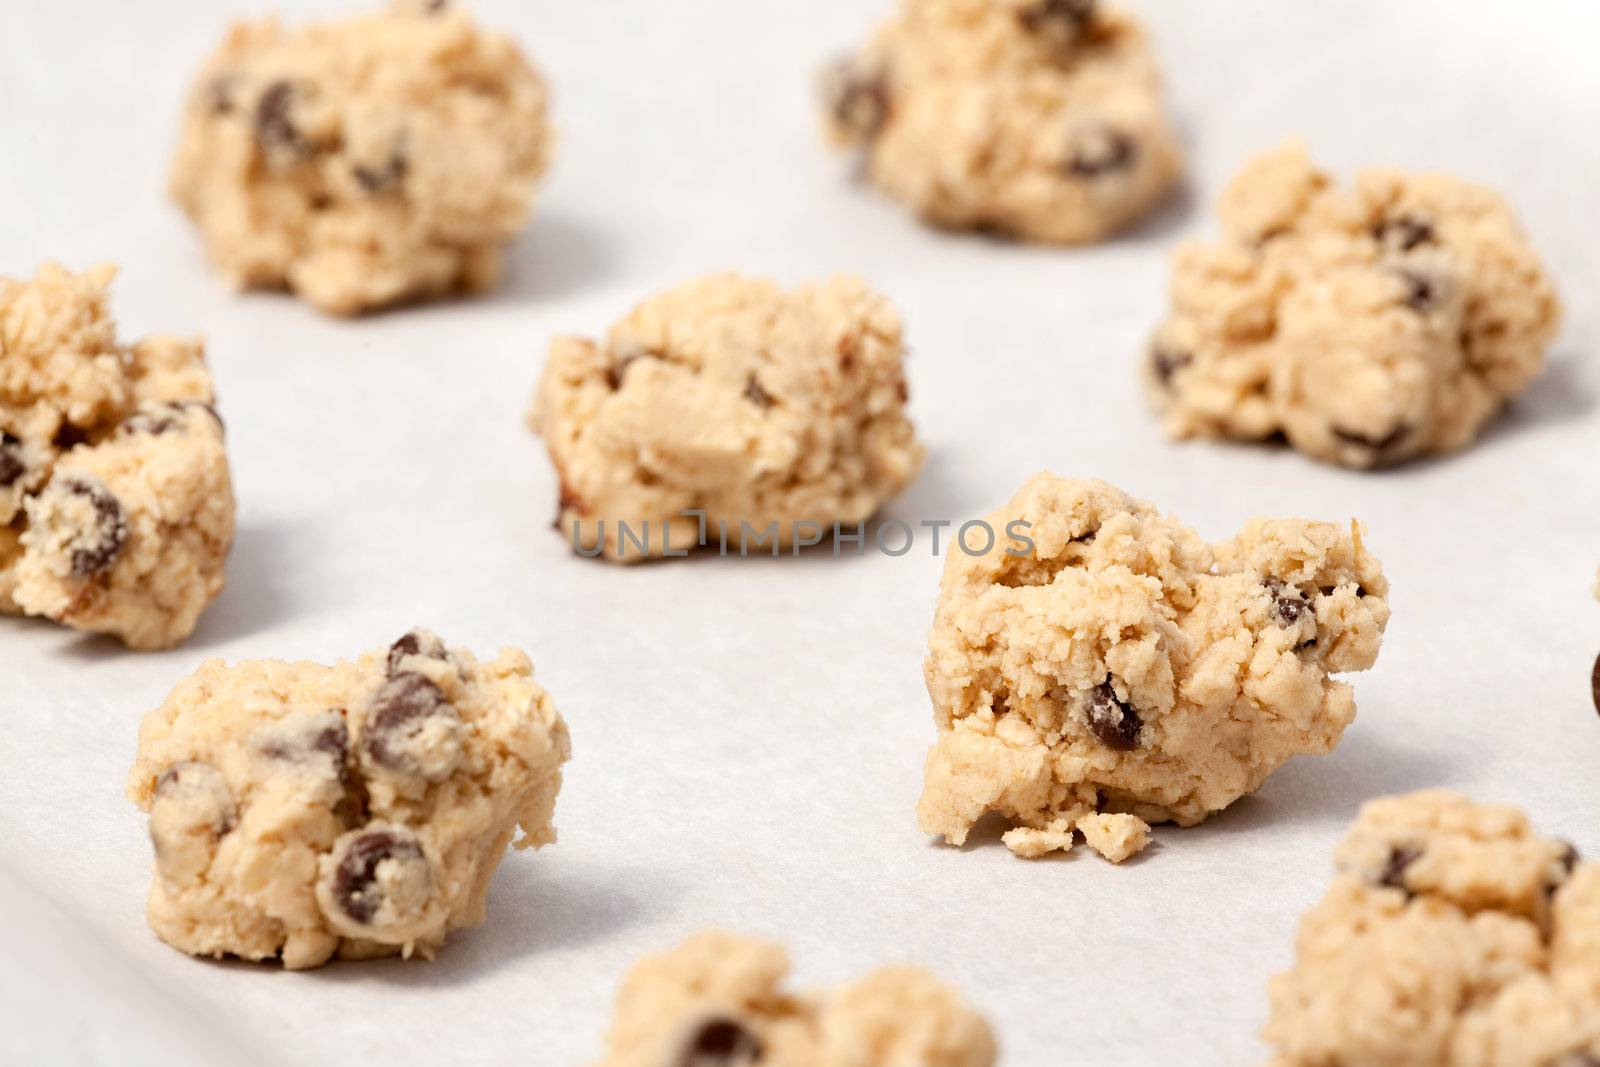 Raw cookie dough on a baking sheet with parchment